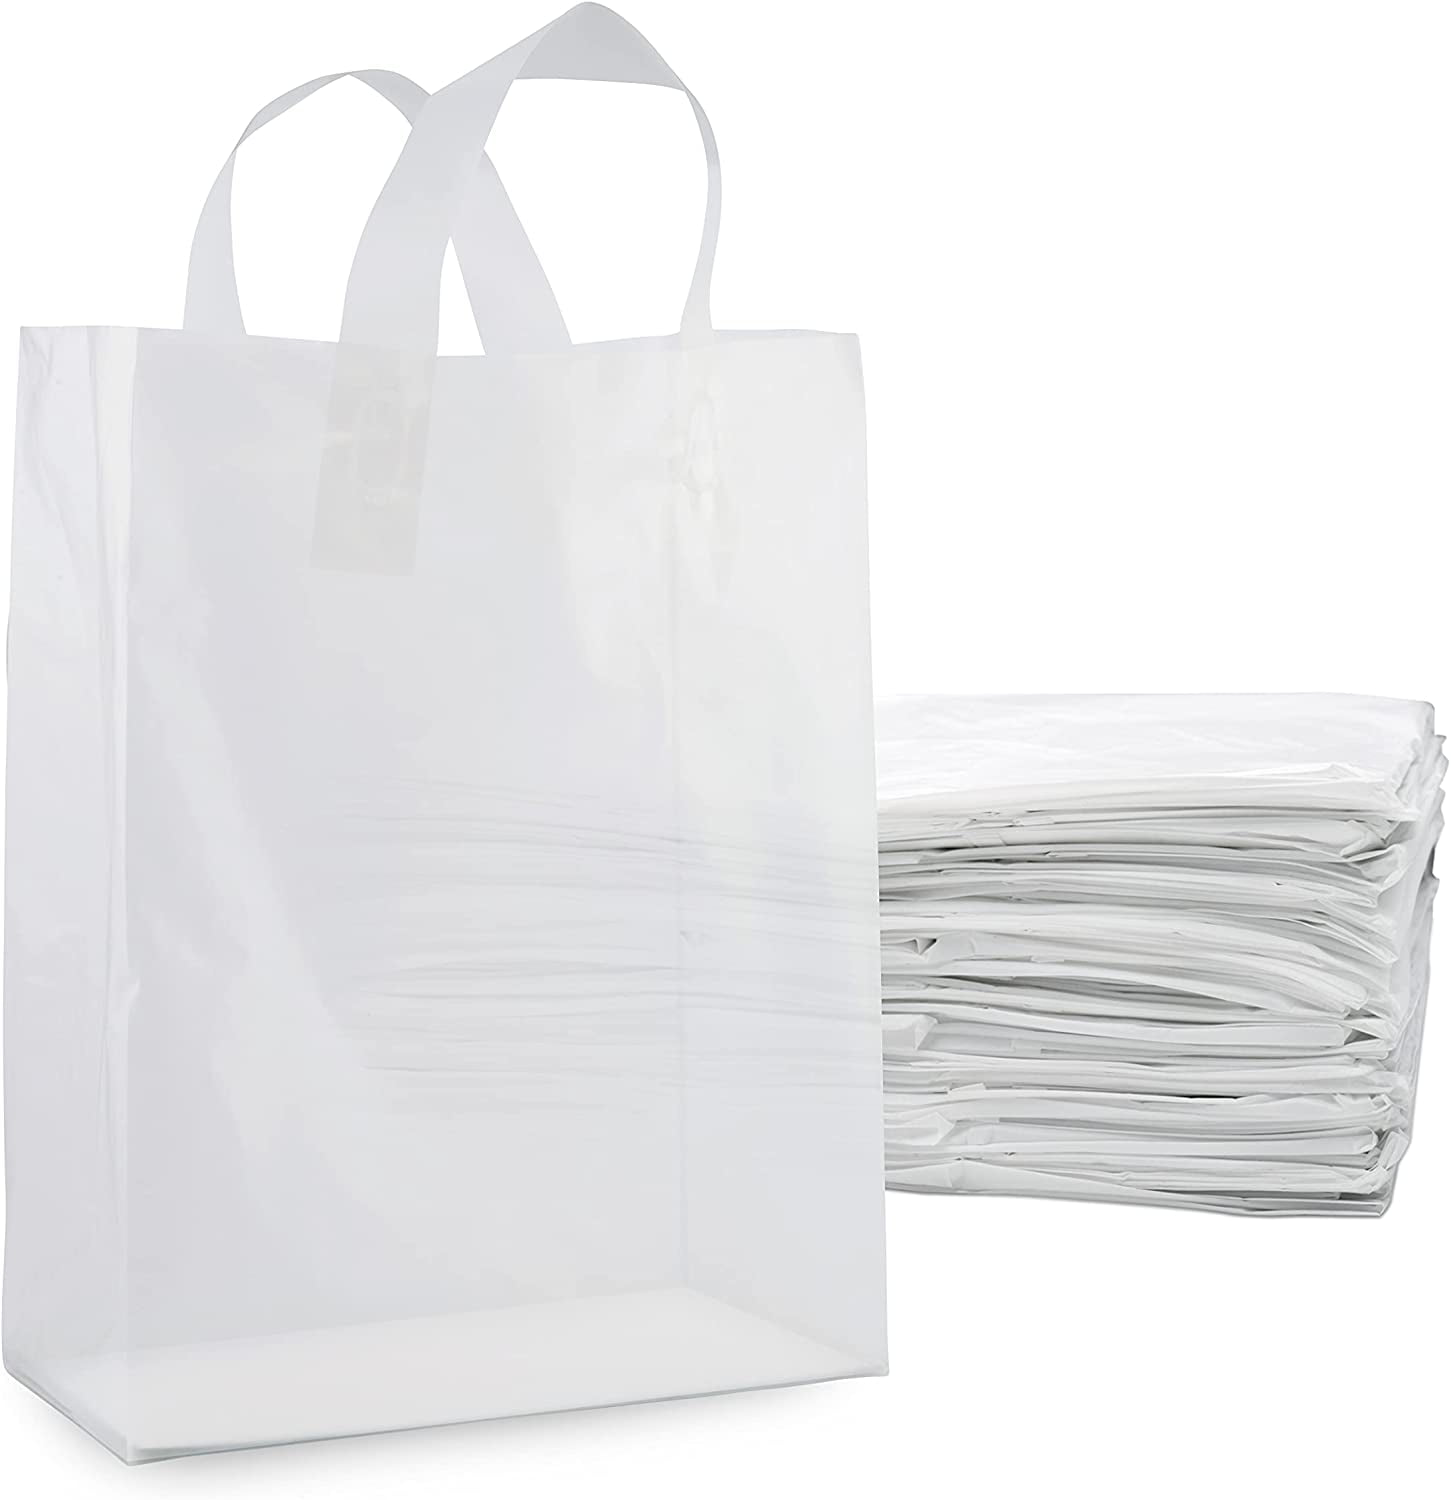 Take Out Bags with Cardboard Bottom Thick Shopping Bags Frosted Clear Plastic Bags with Soft Strap Handles High-Density 10x5x13x5 50 Pcs. Gift Bags 